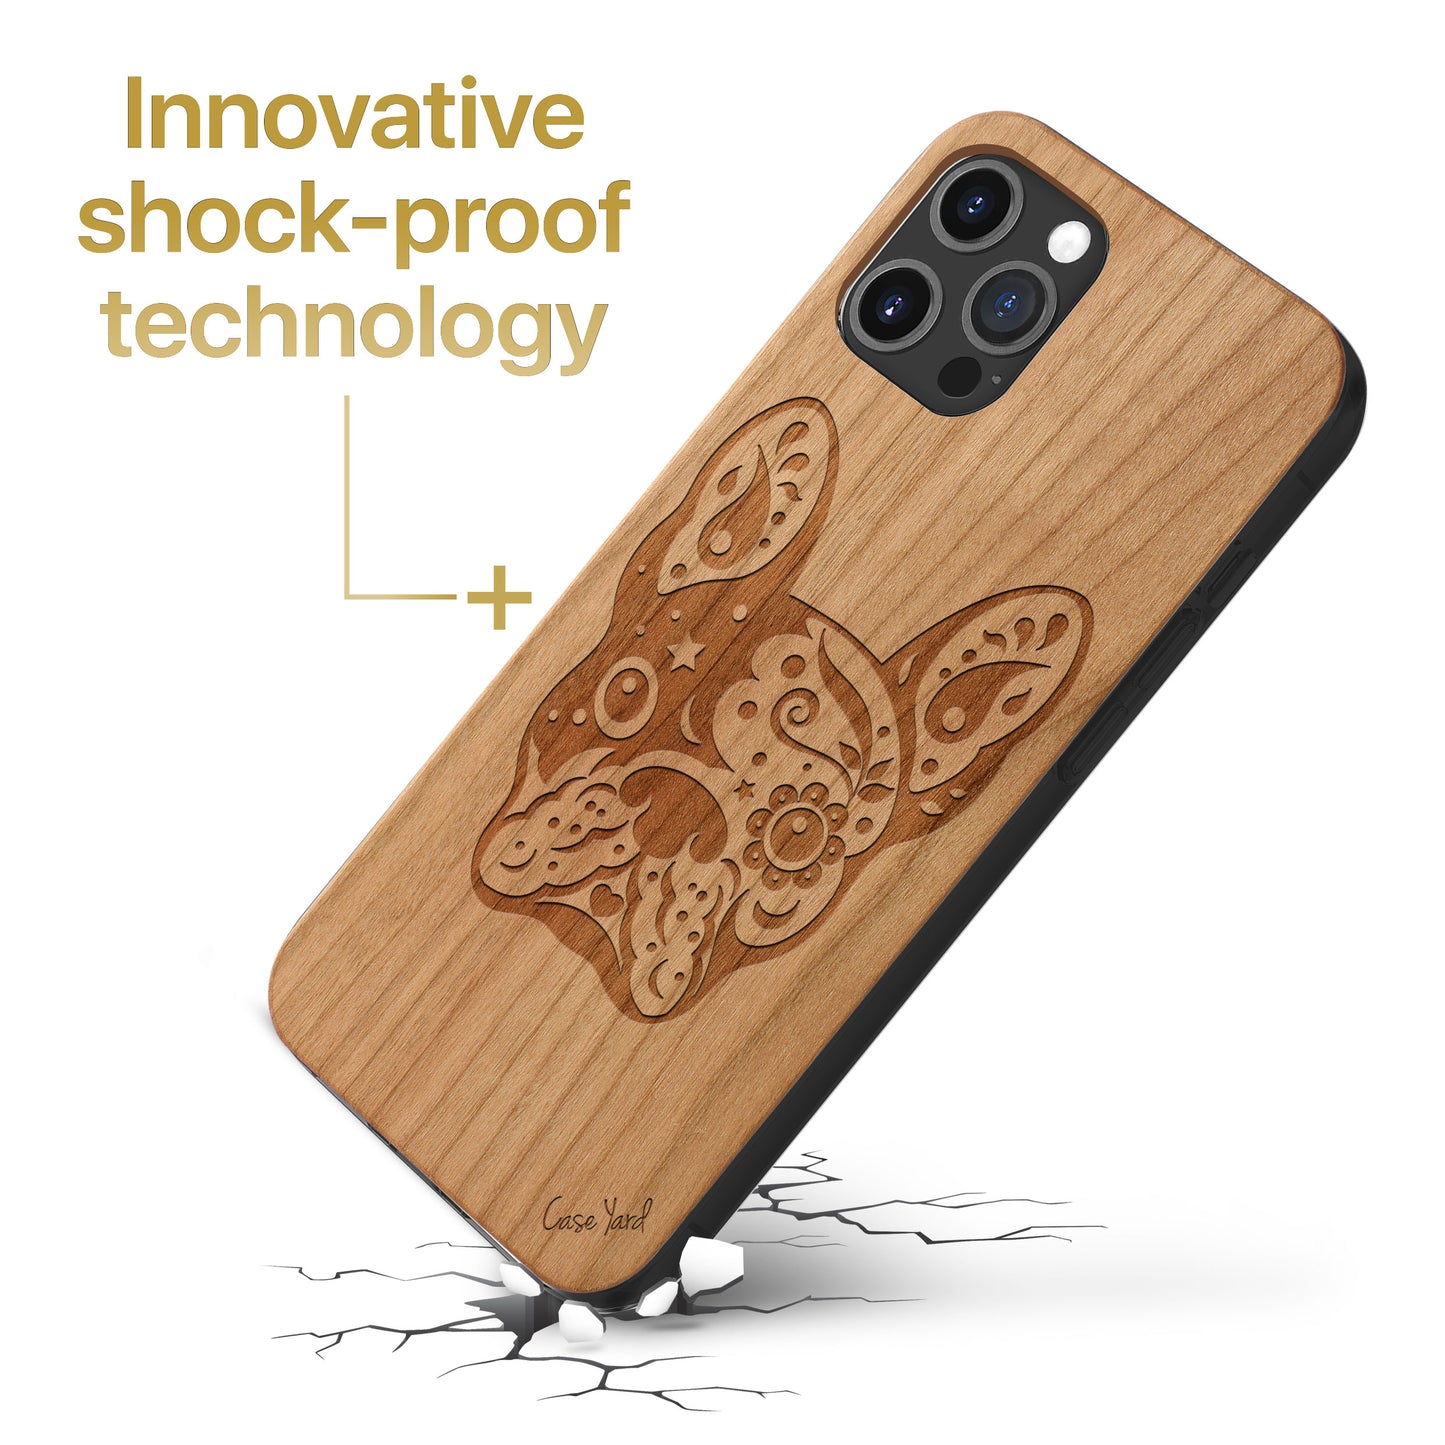 Wooden Cell Phone Case Cover, Laser Engraved case for iPhone & Samsung phone Bulldog Design